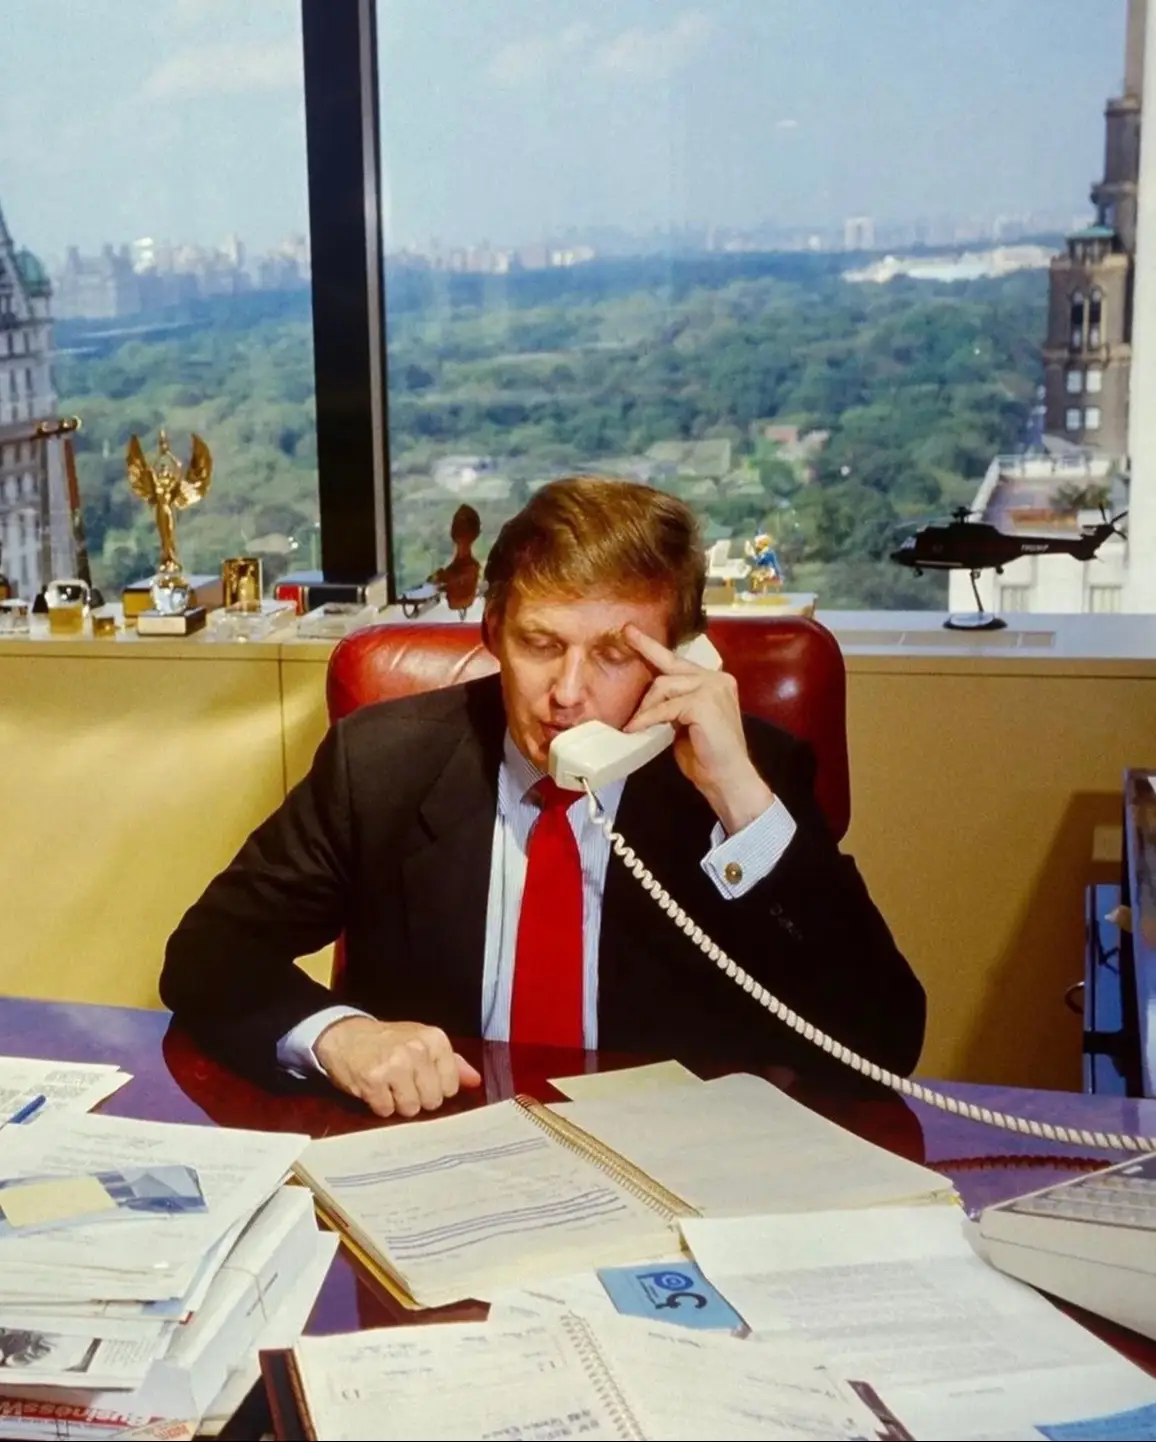 Wall Street Trump before the White House 🏛️🇺🇸 #justclassy #business #oldmoney #president #aesthetic #america #trump #money 